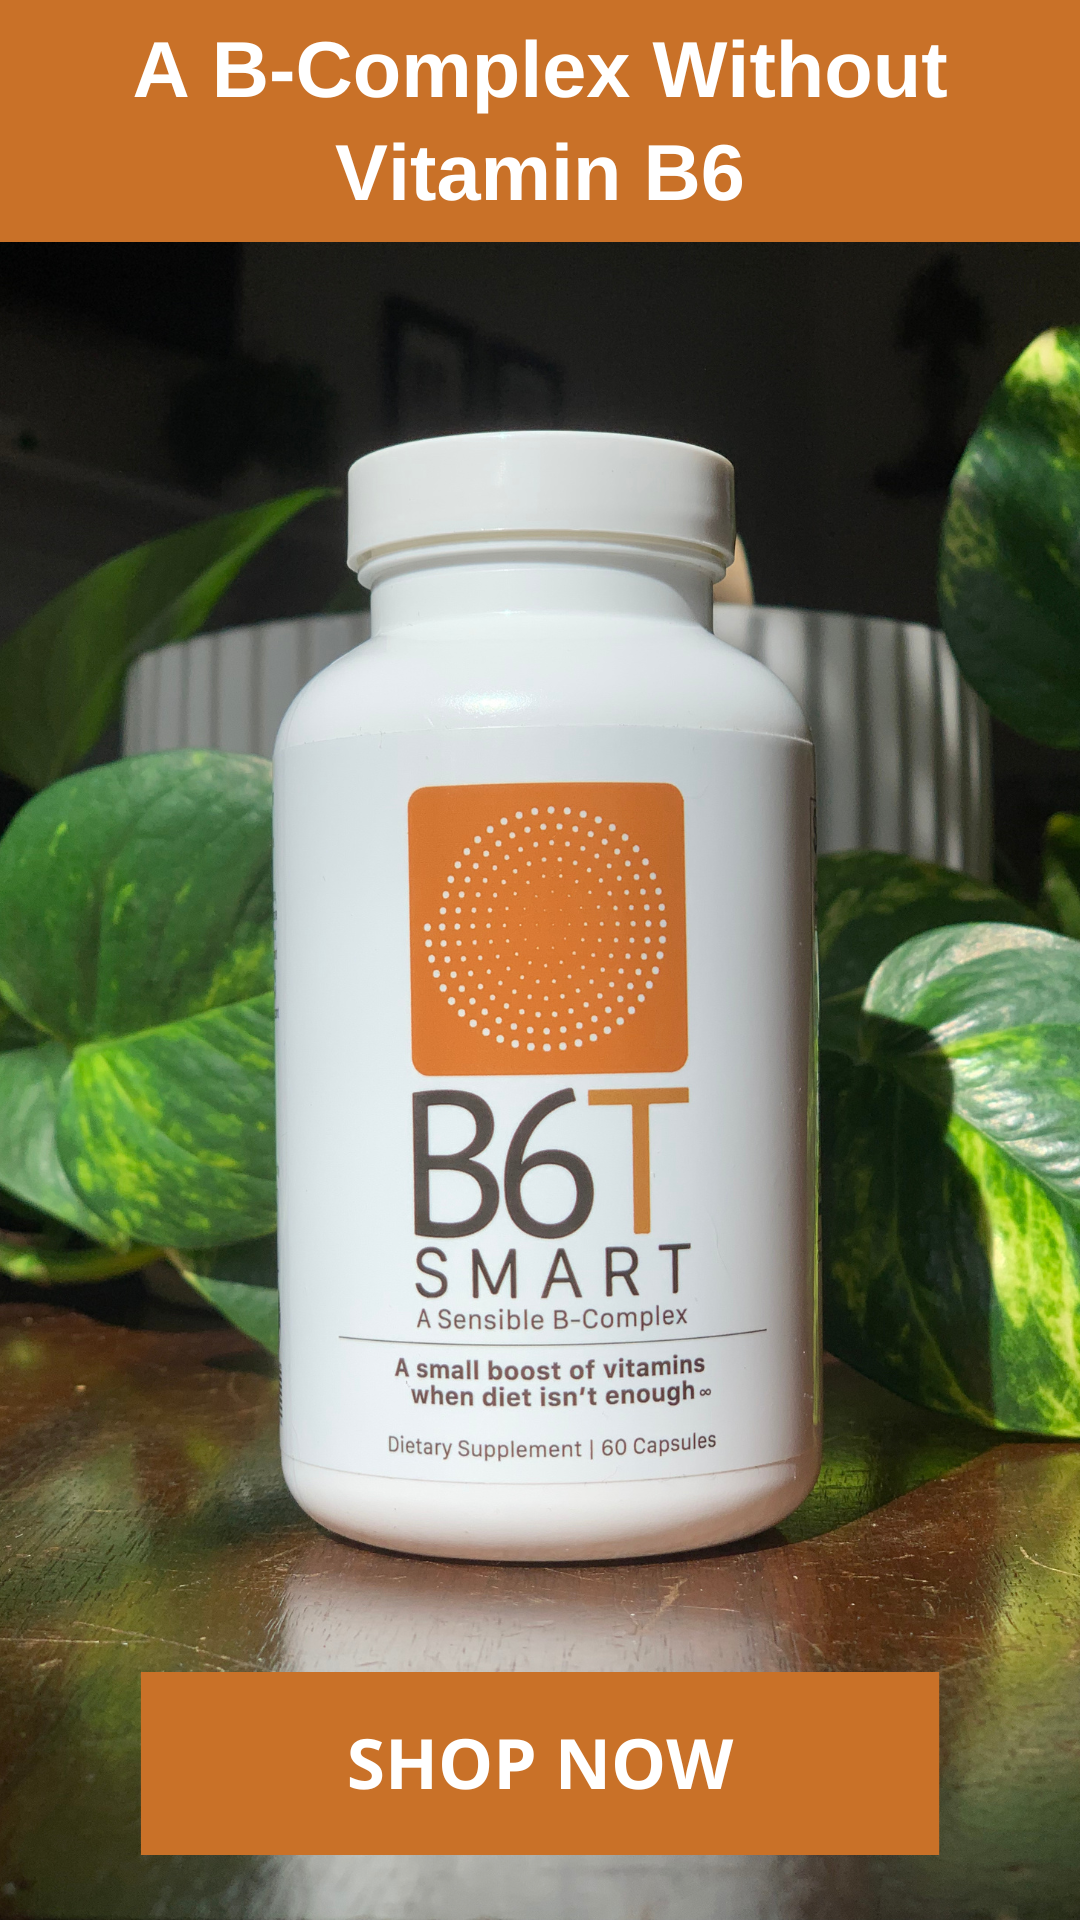 B-Complex Without Vitamin B6